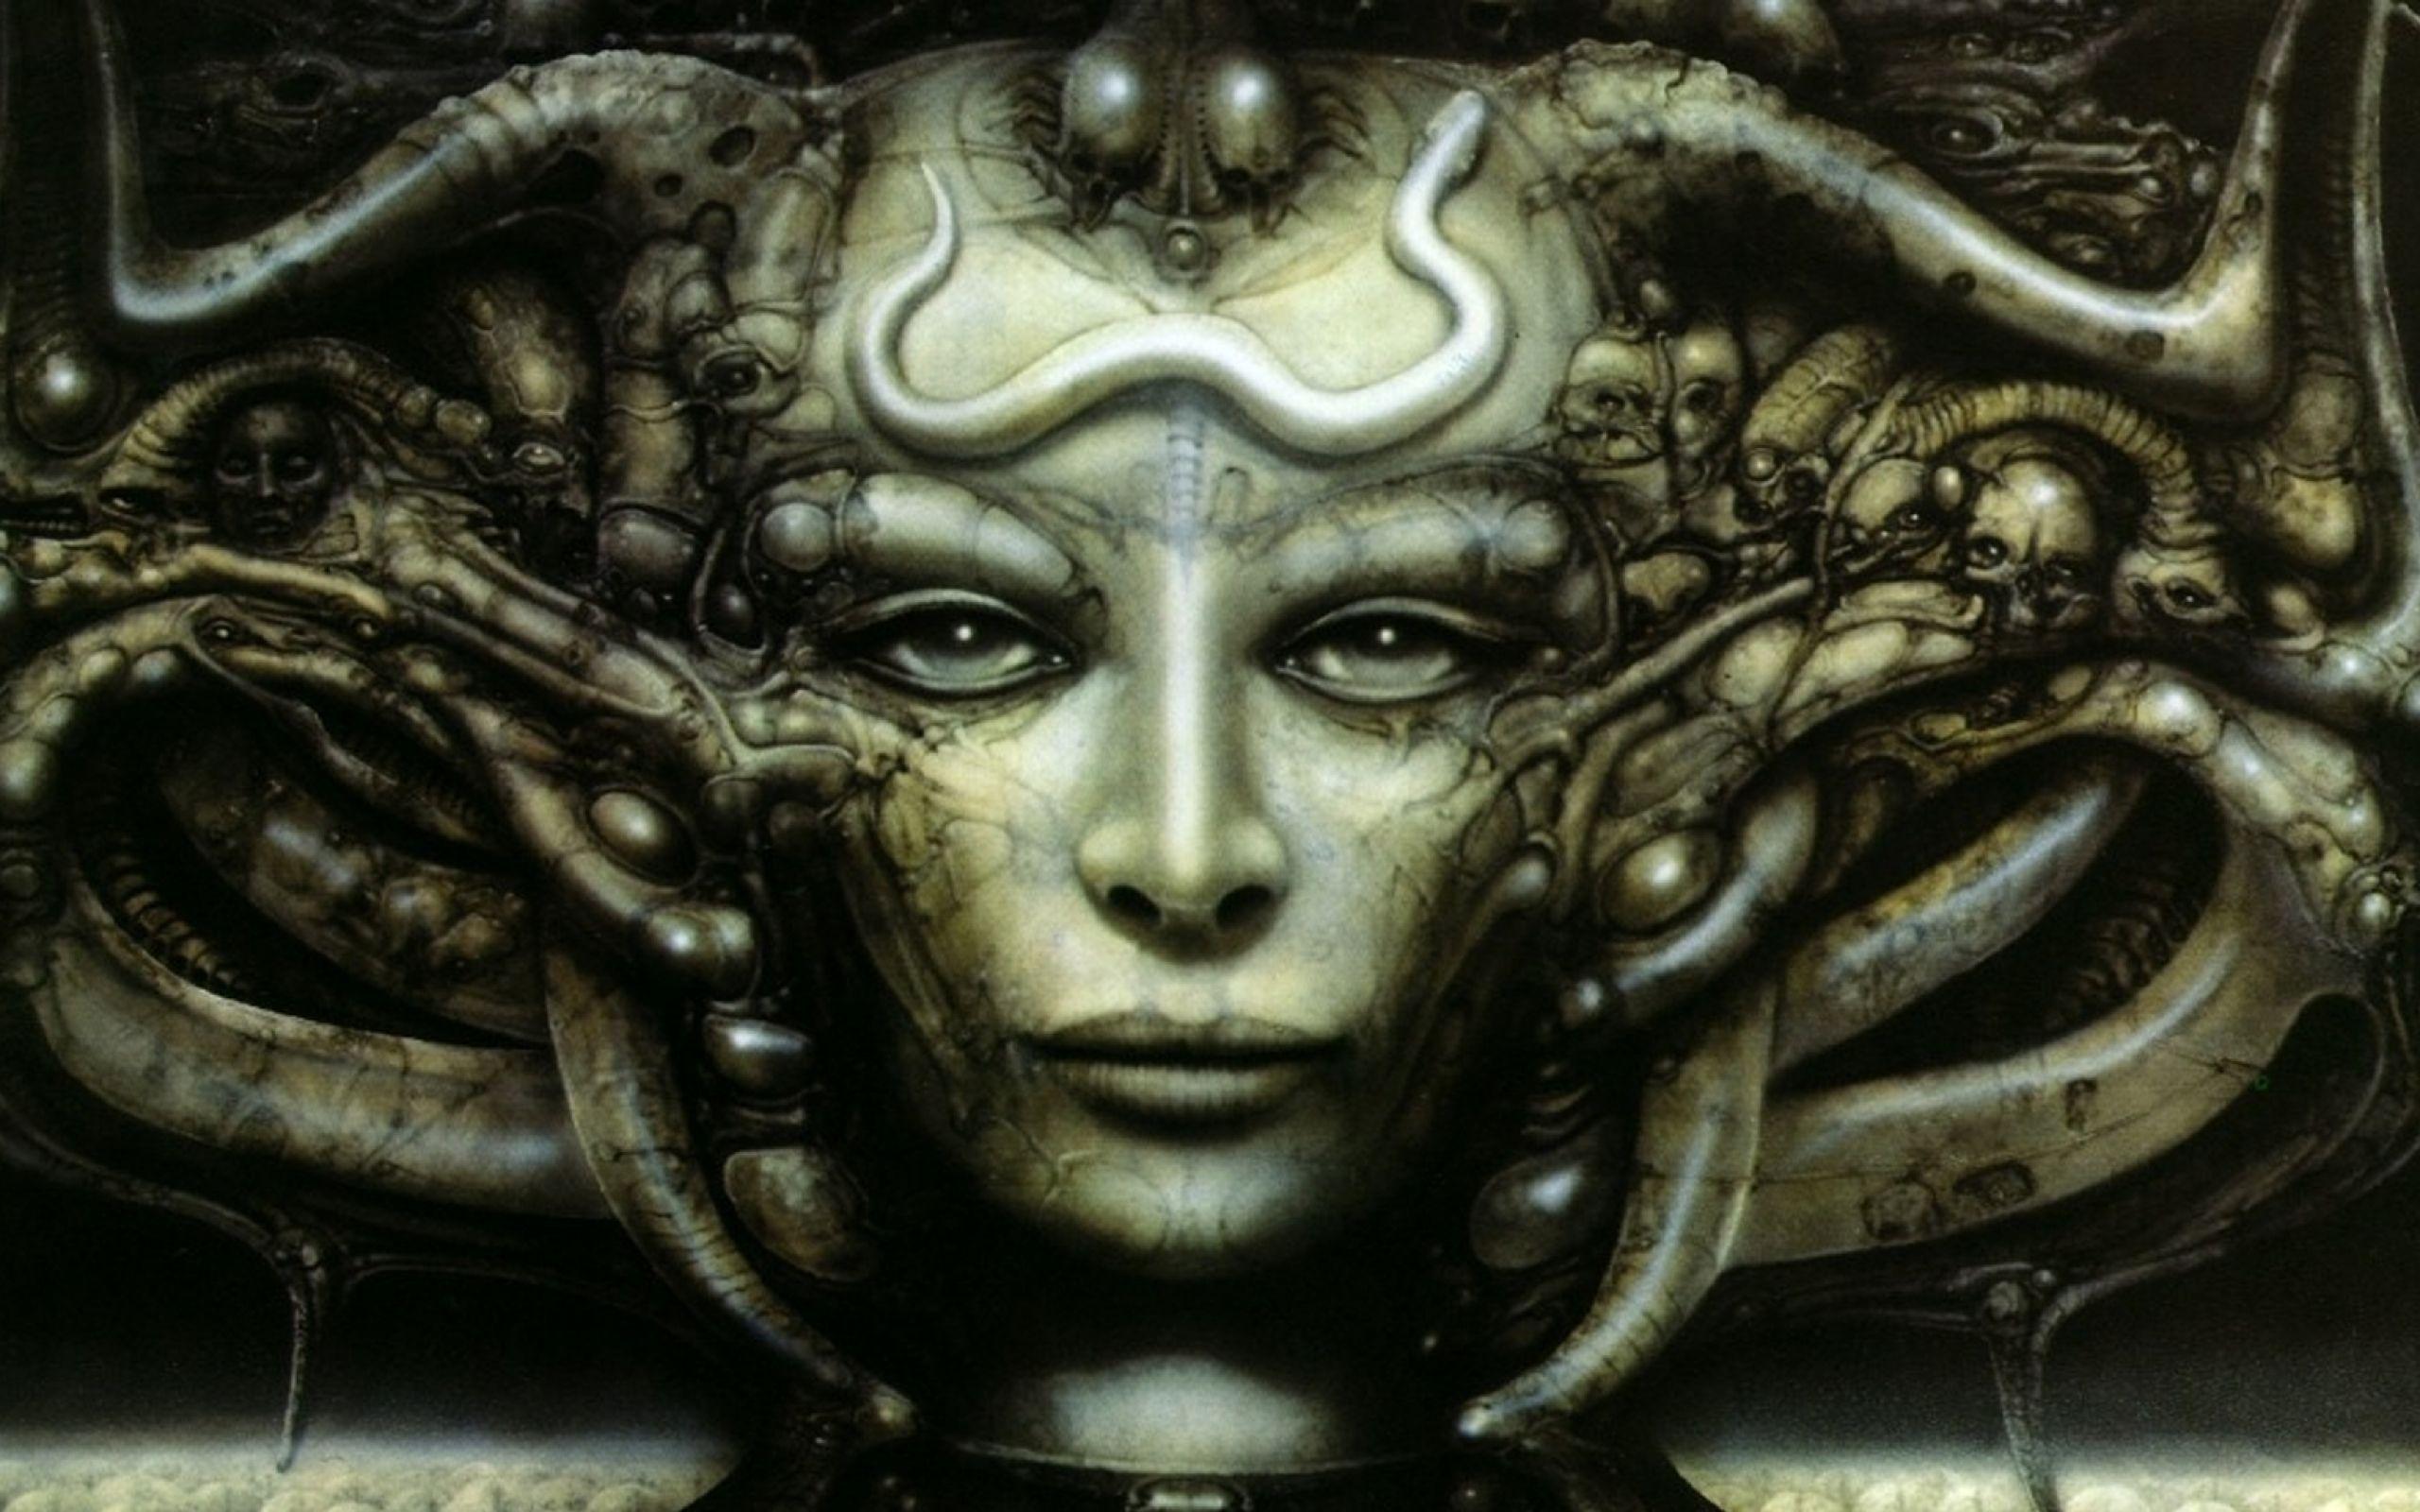 H.R. Giger's Necronomicon HD Wallpaper. Background Image